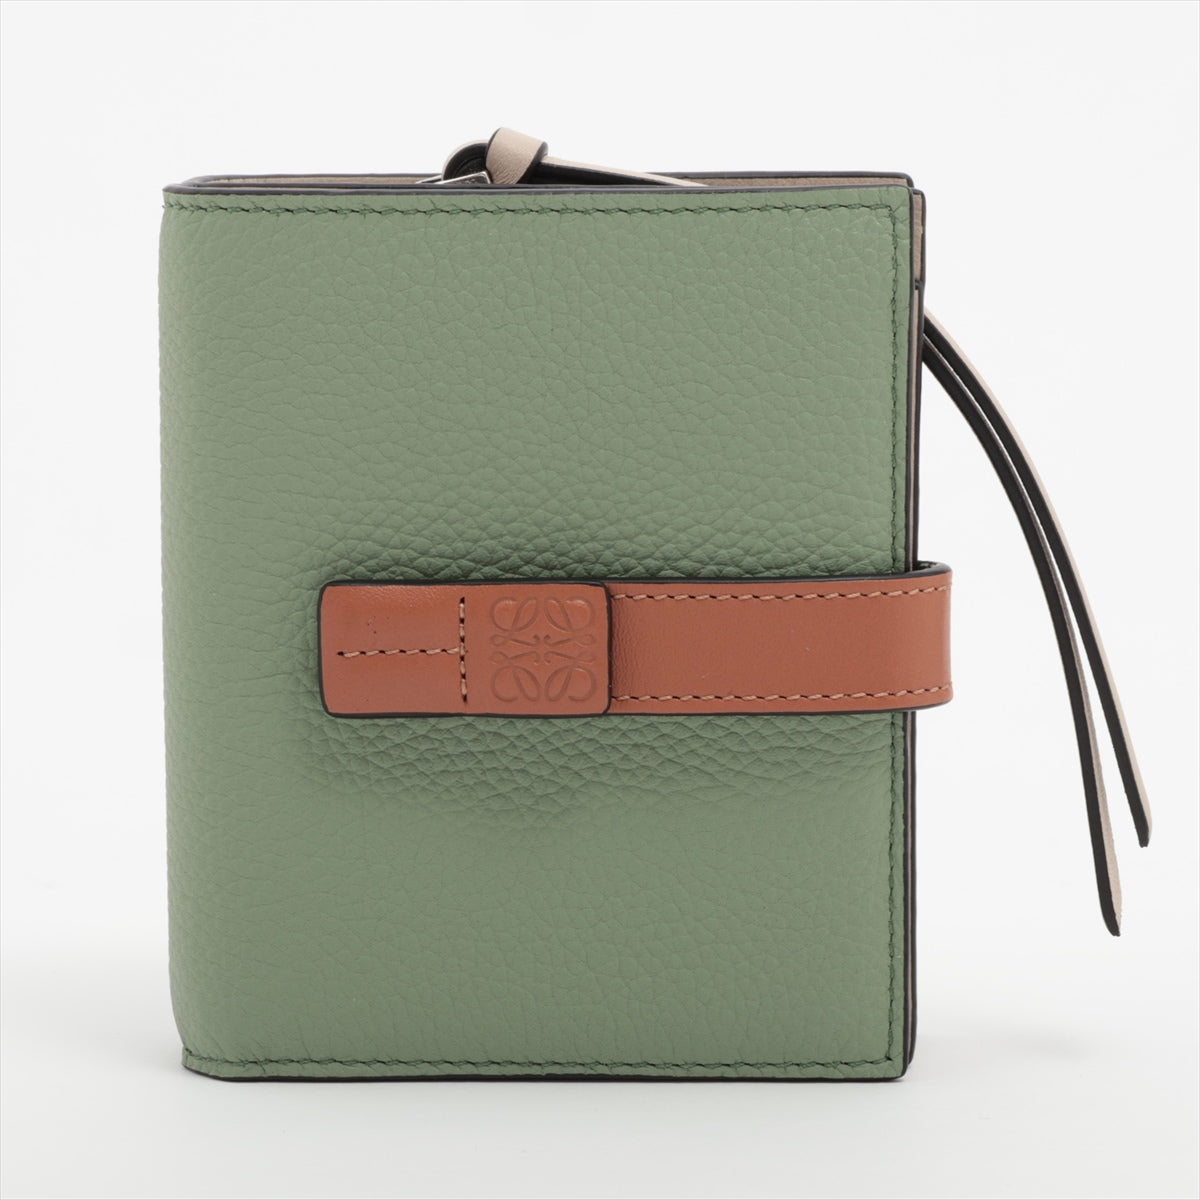 Loewe Anagram Compact  Wallet St Green  Compact Wallet Rosemary